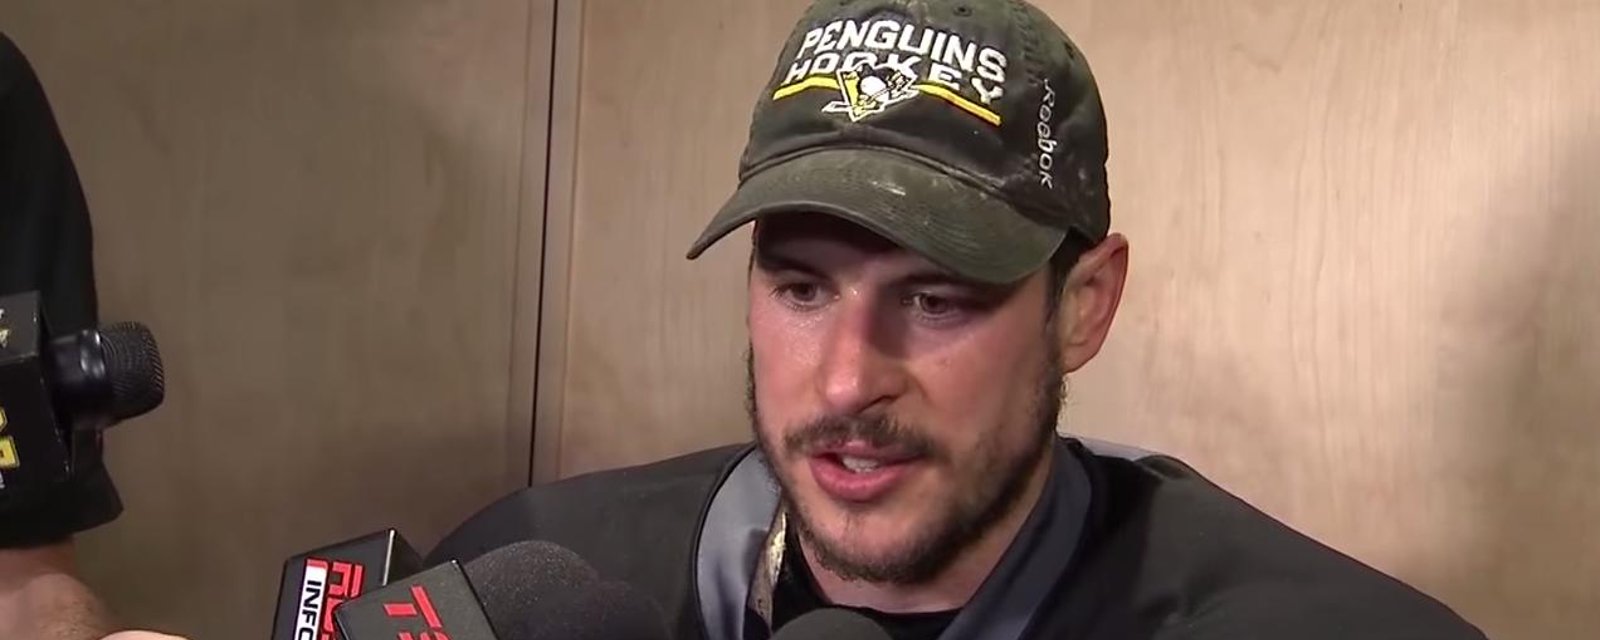 Crosby gives his thoughts about upcoming game 3. 